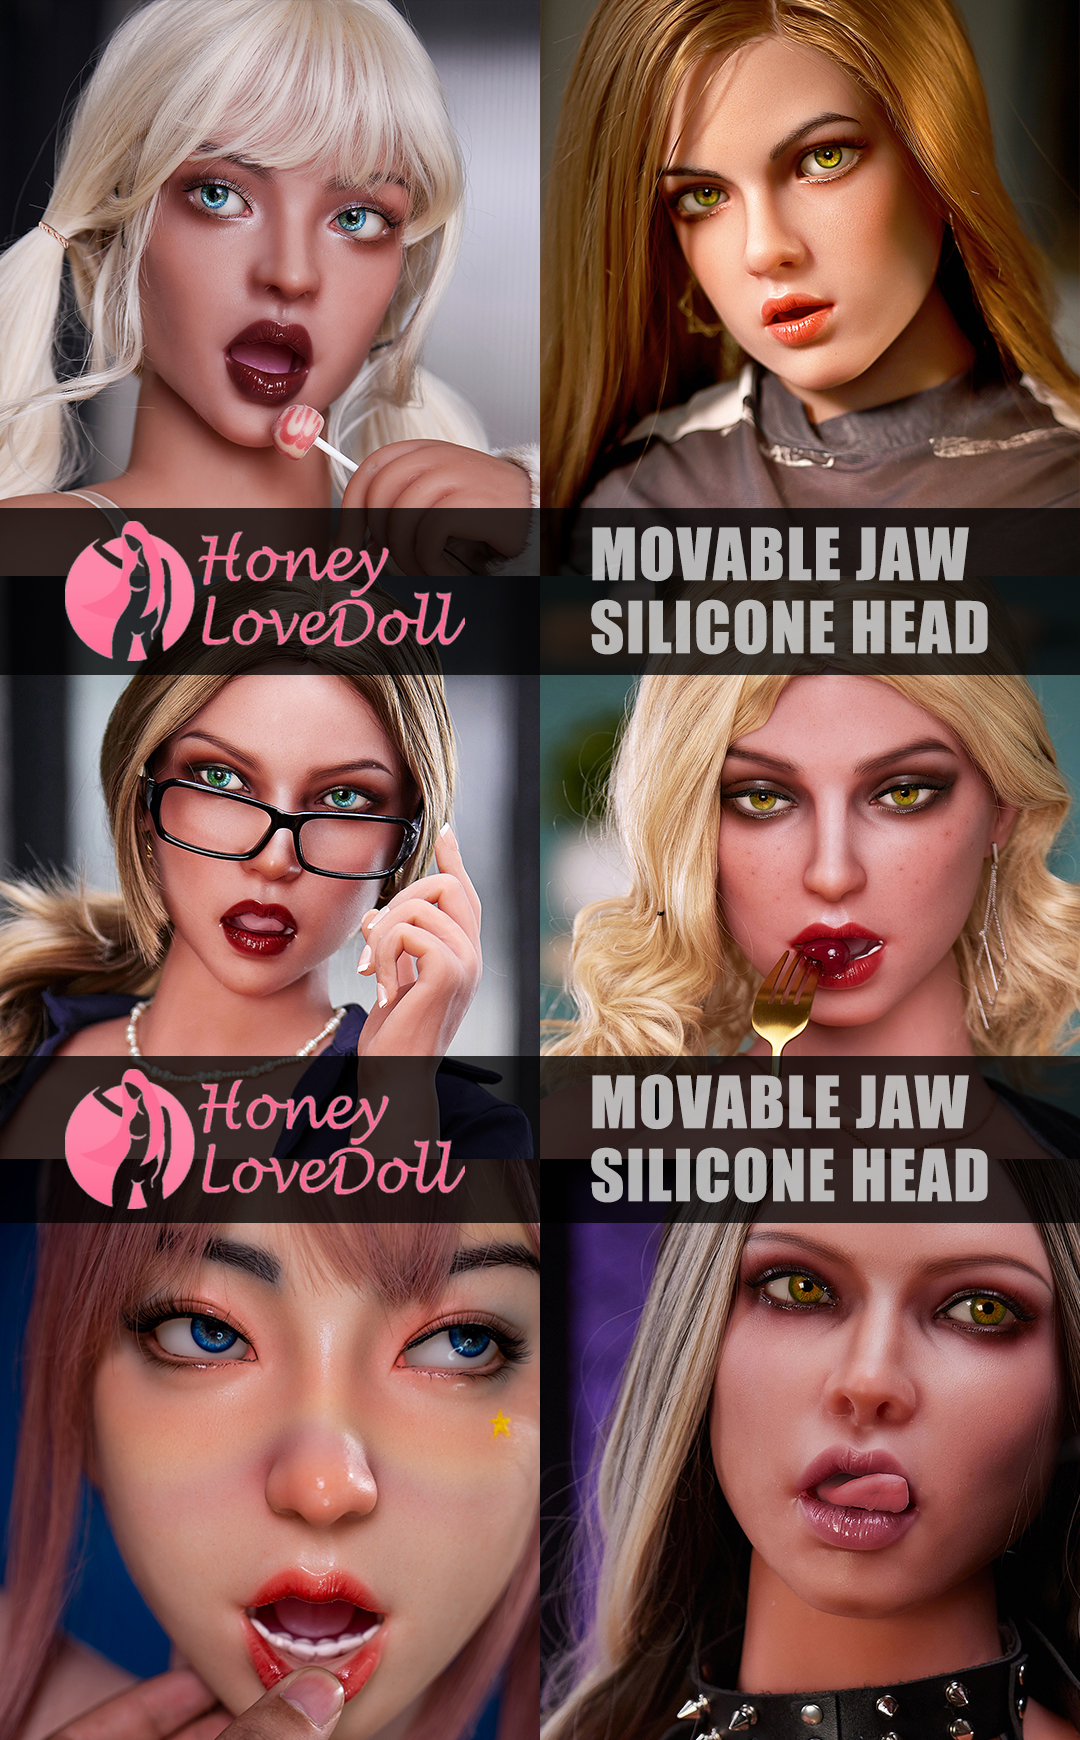 Movable Jaw Fantasy Silicone Head-Honeylovedoll